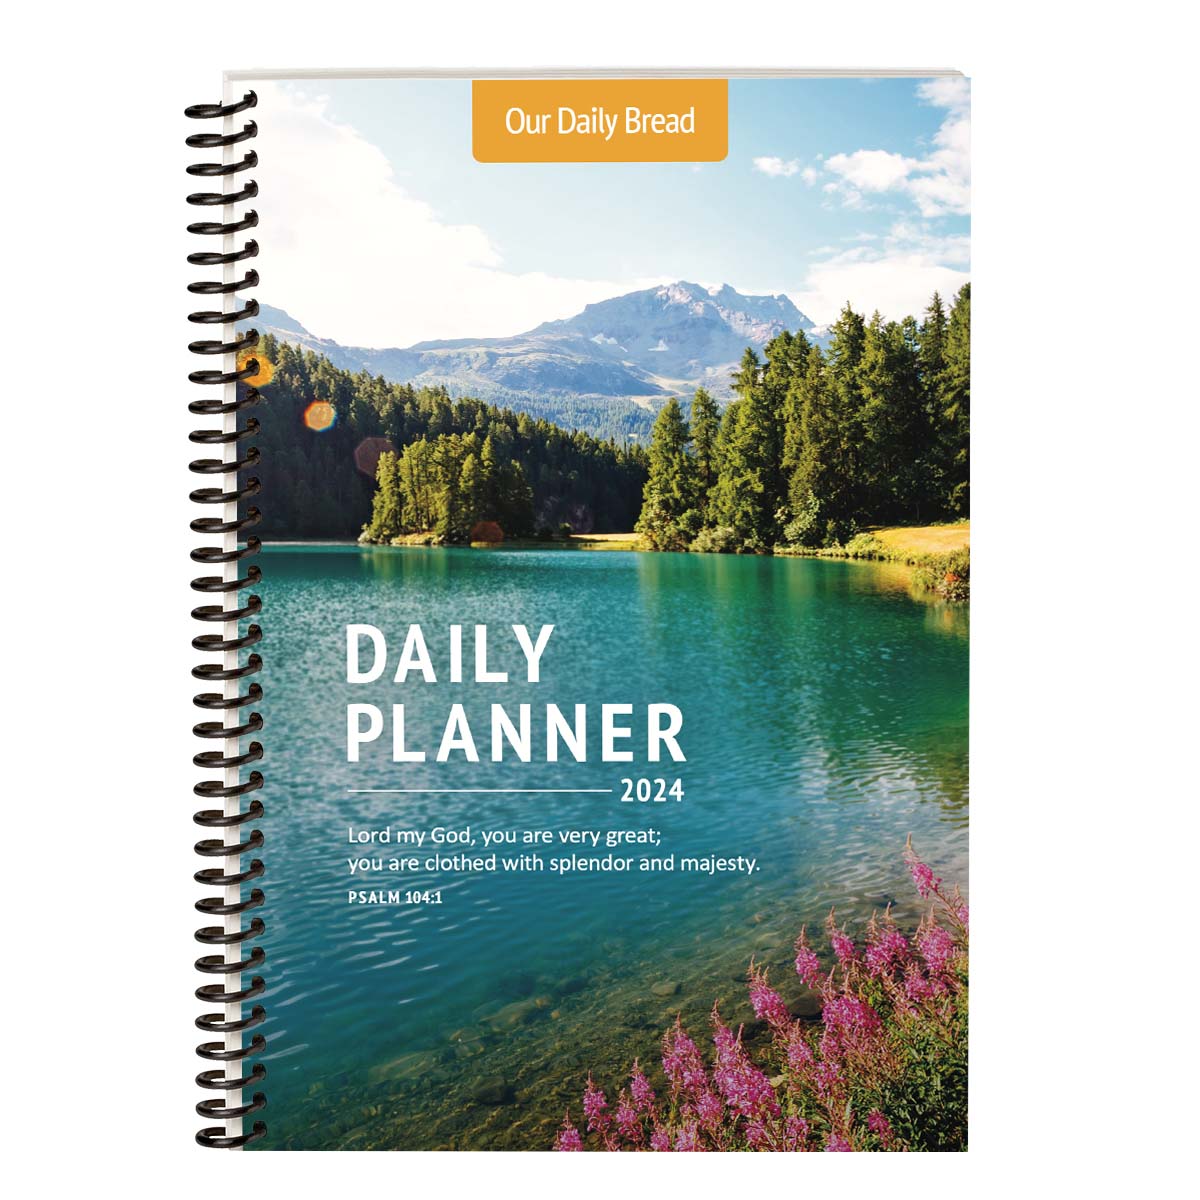 Our Daily Bread 2024 Daily Planner Our Daily Bread Publishing Canada